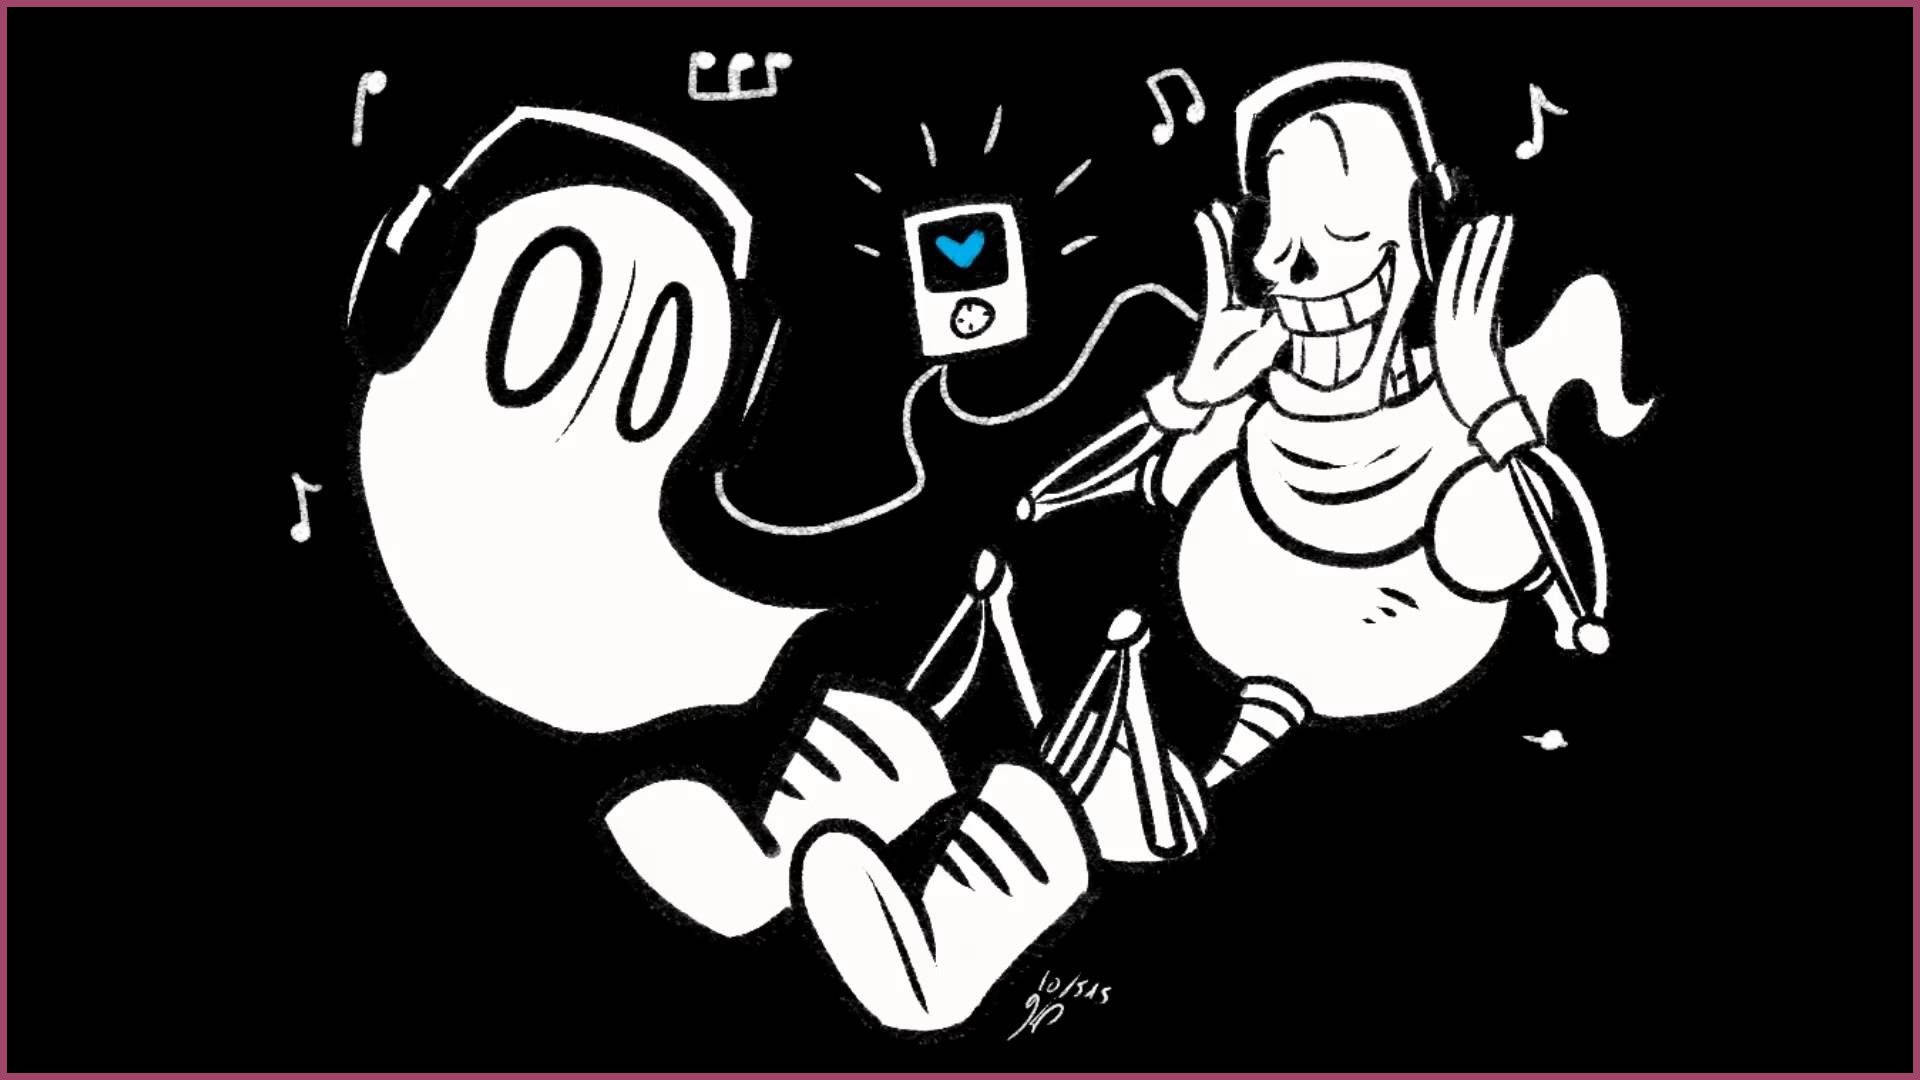 Undertale Papuris and Napstablook jamming to music wallpaper.